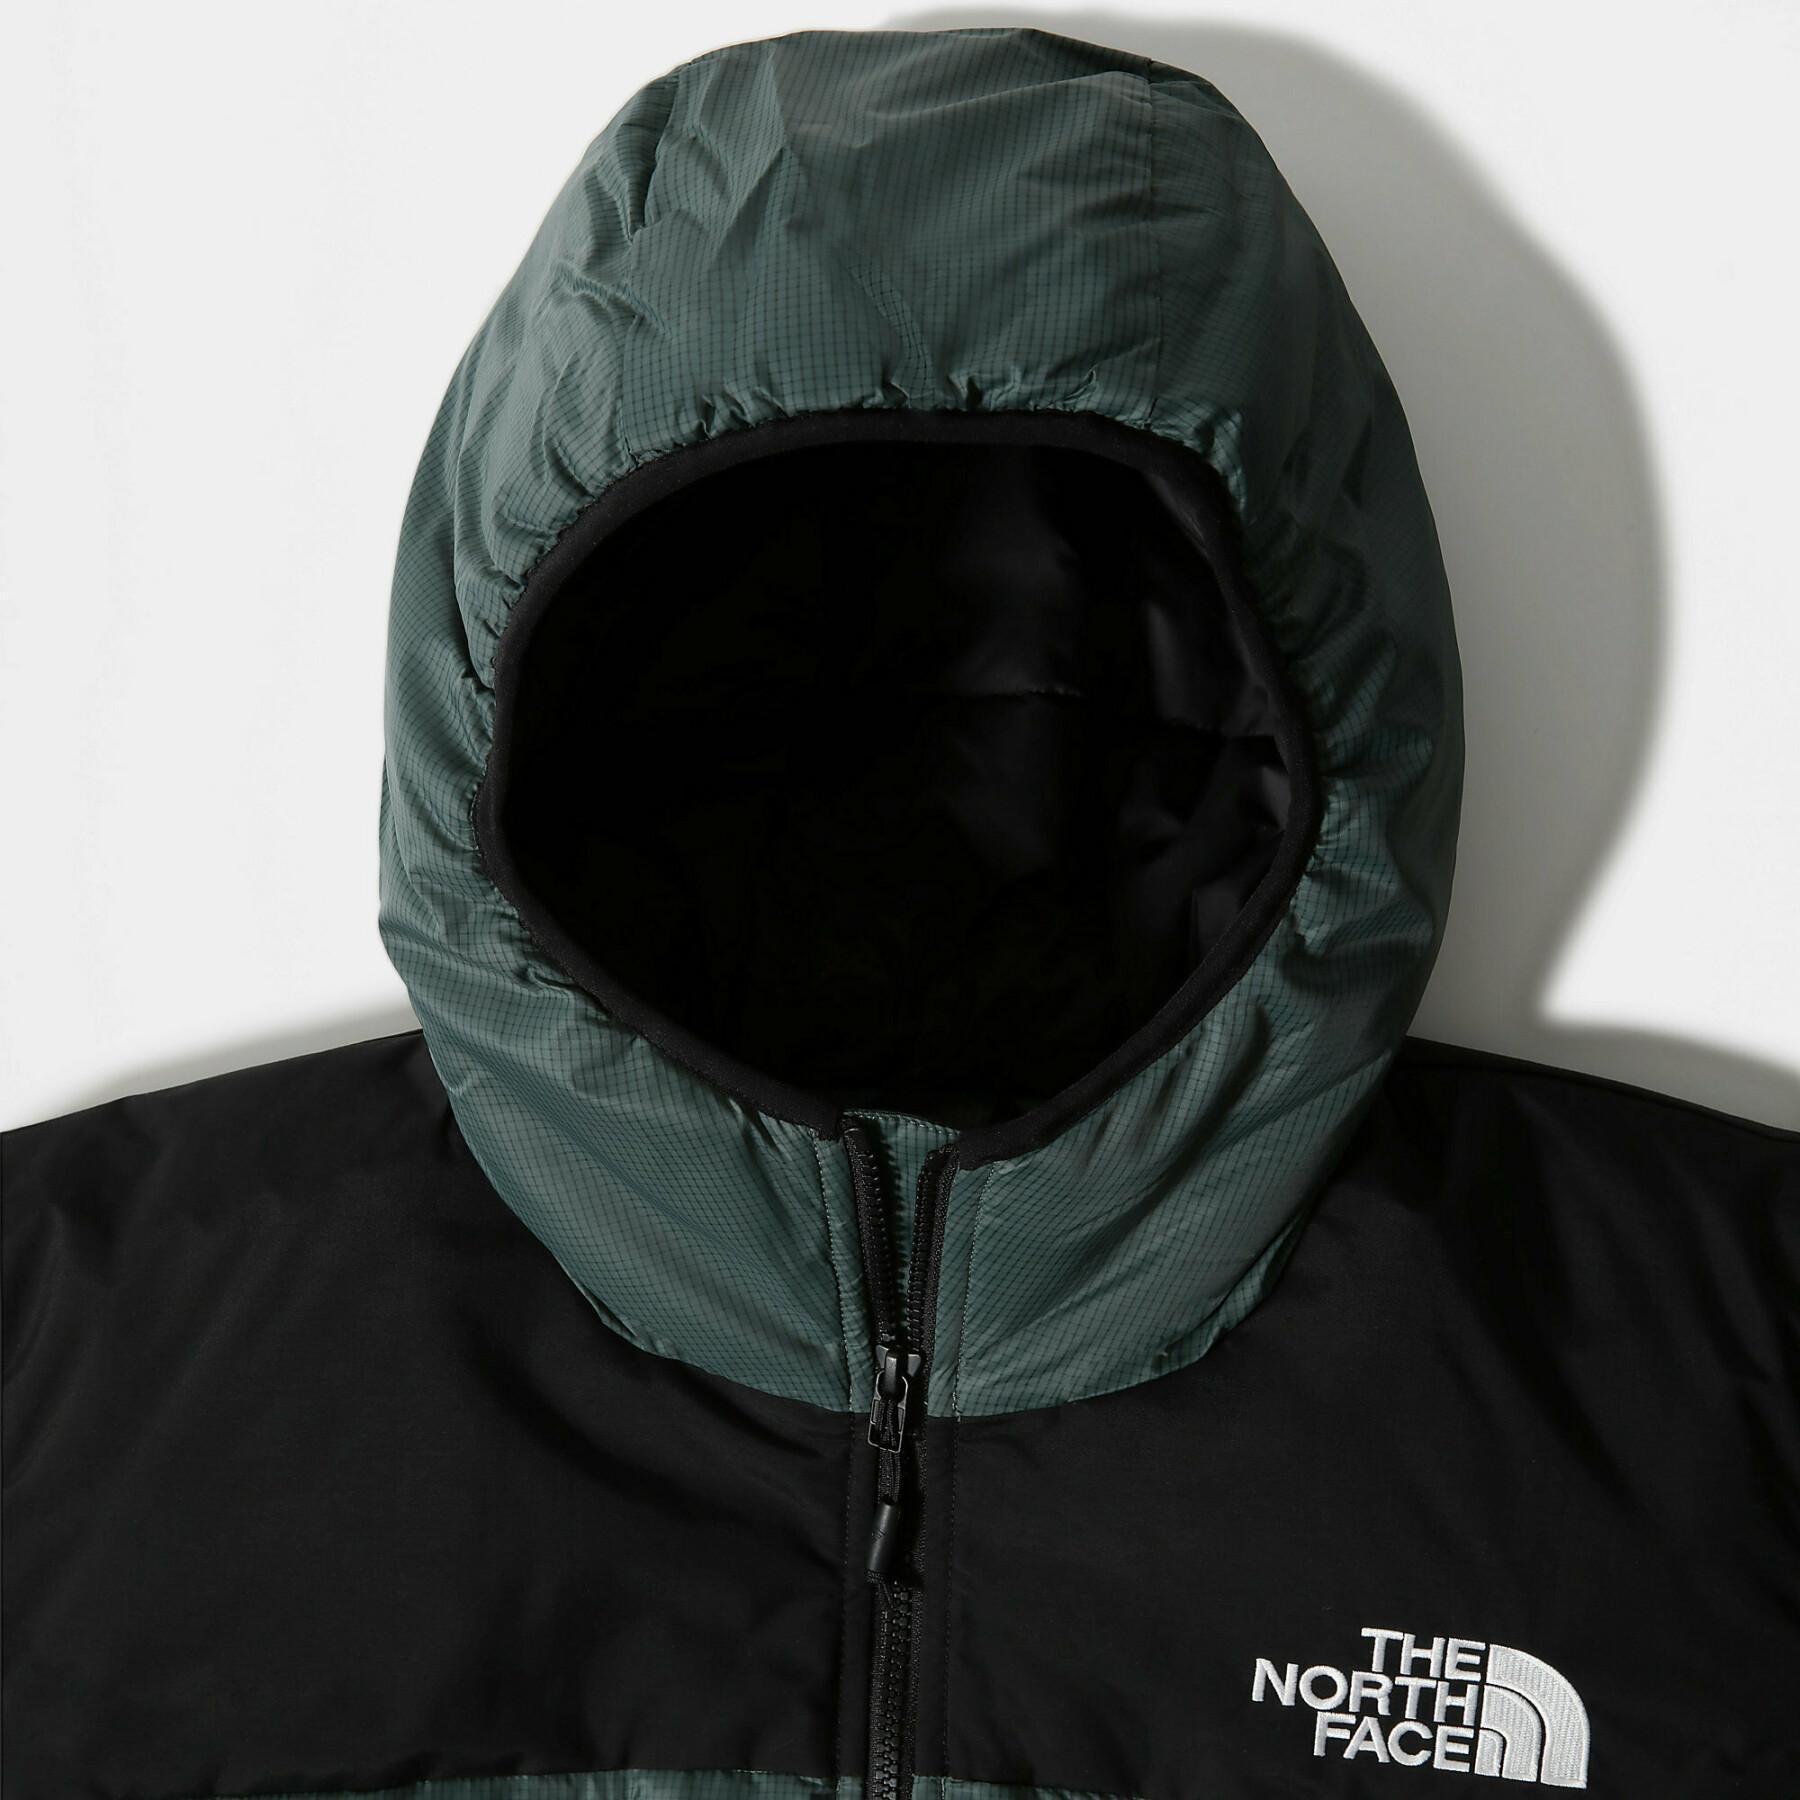 Lightweight down jacket The North Face Himalayan